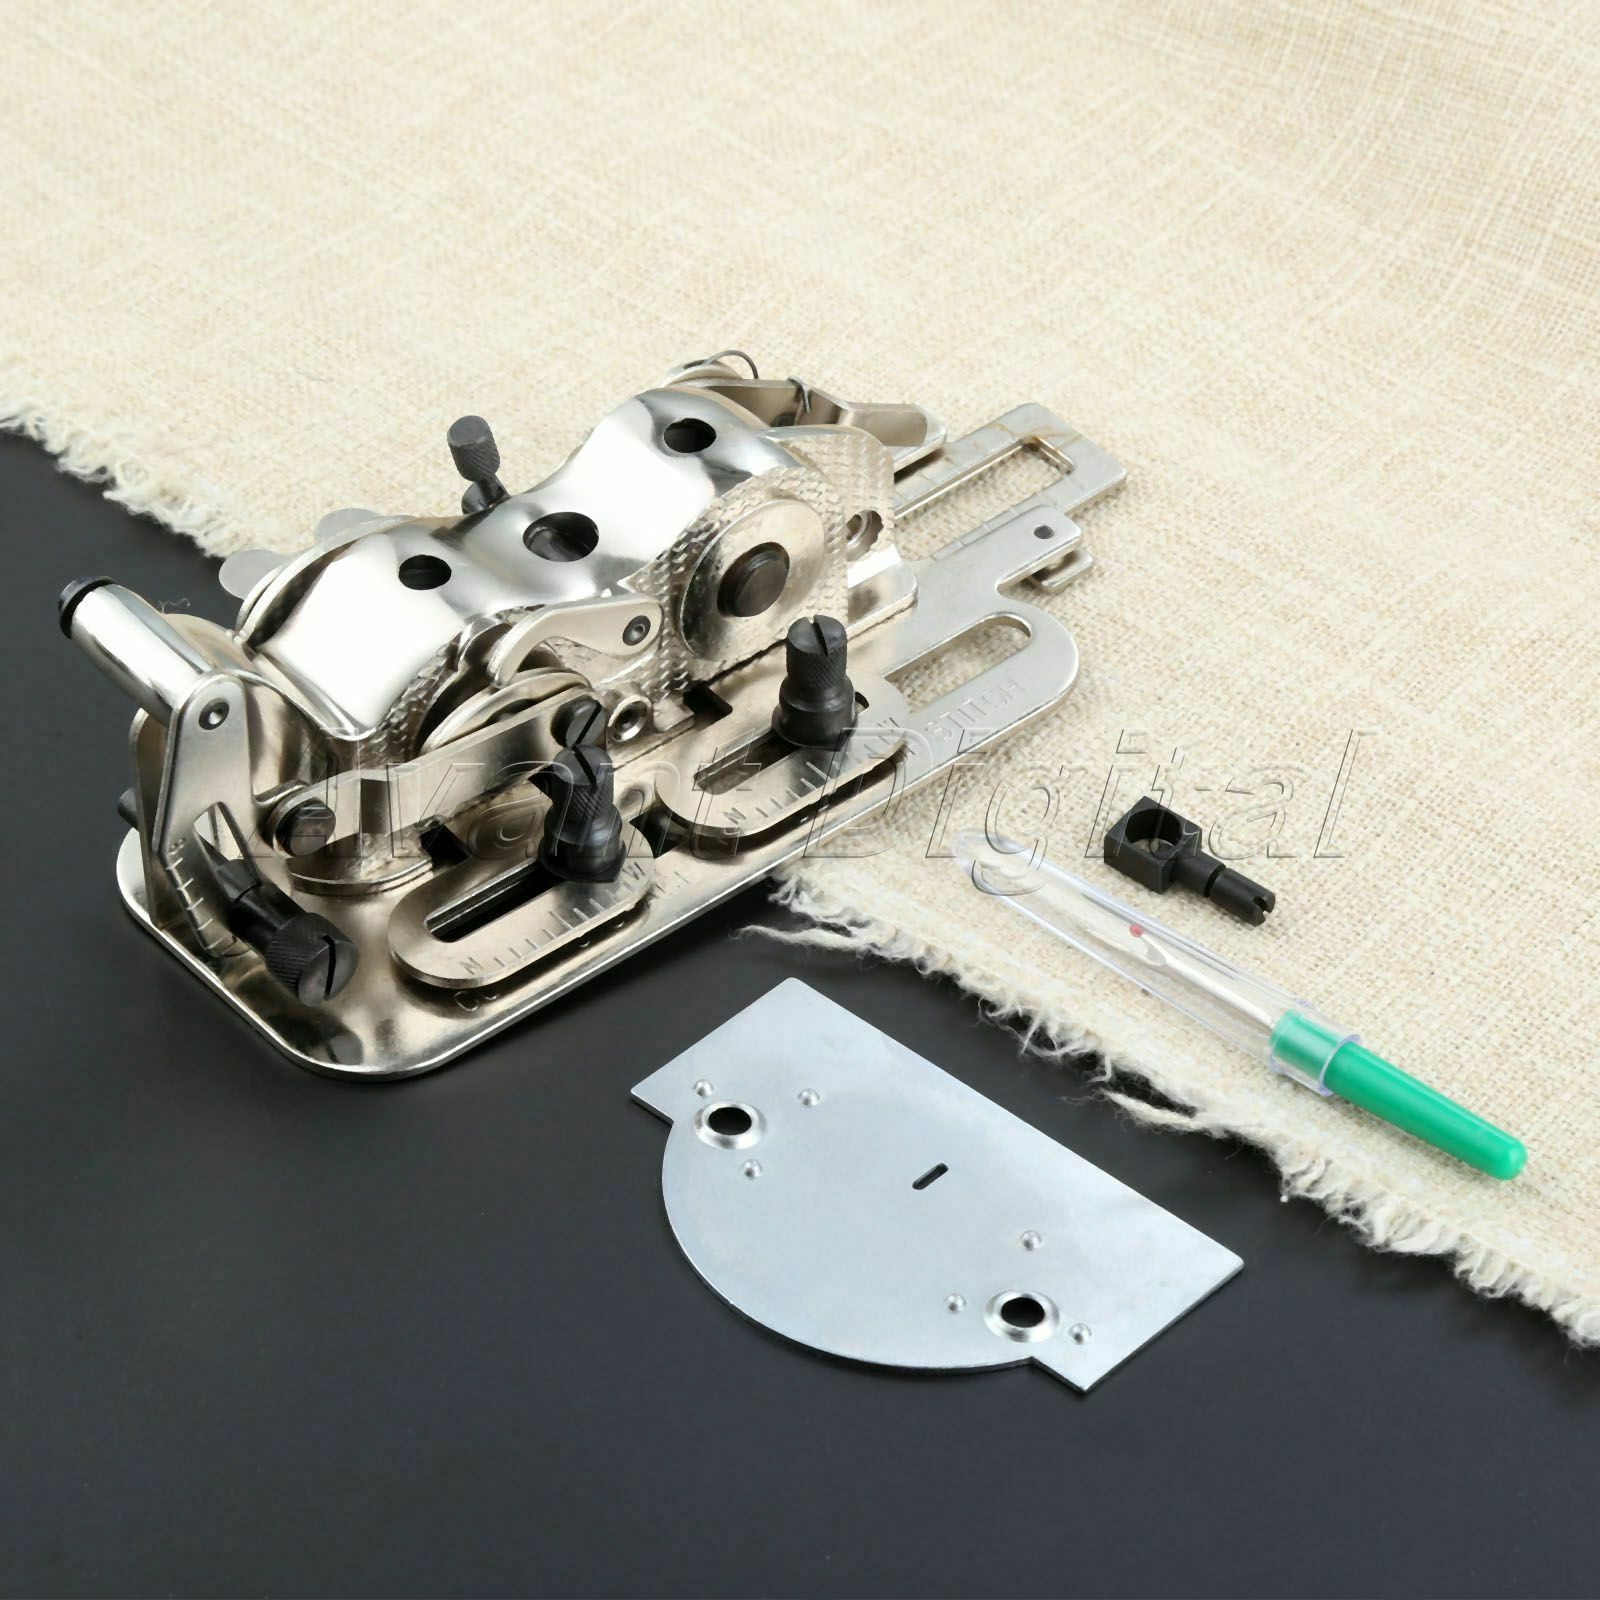 YS-4454/4455 Industrial Buttonholer for Single Needle Lockstitch Sewing Machine